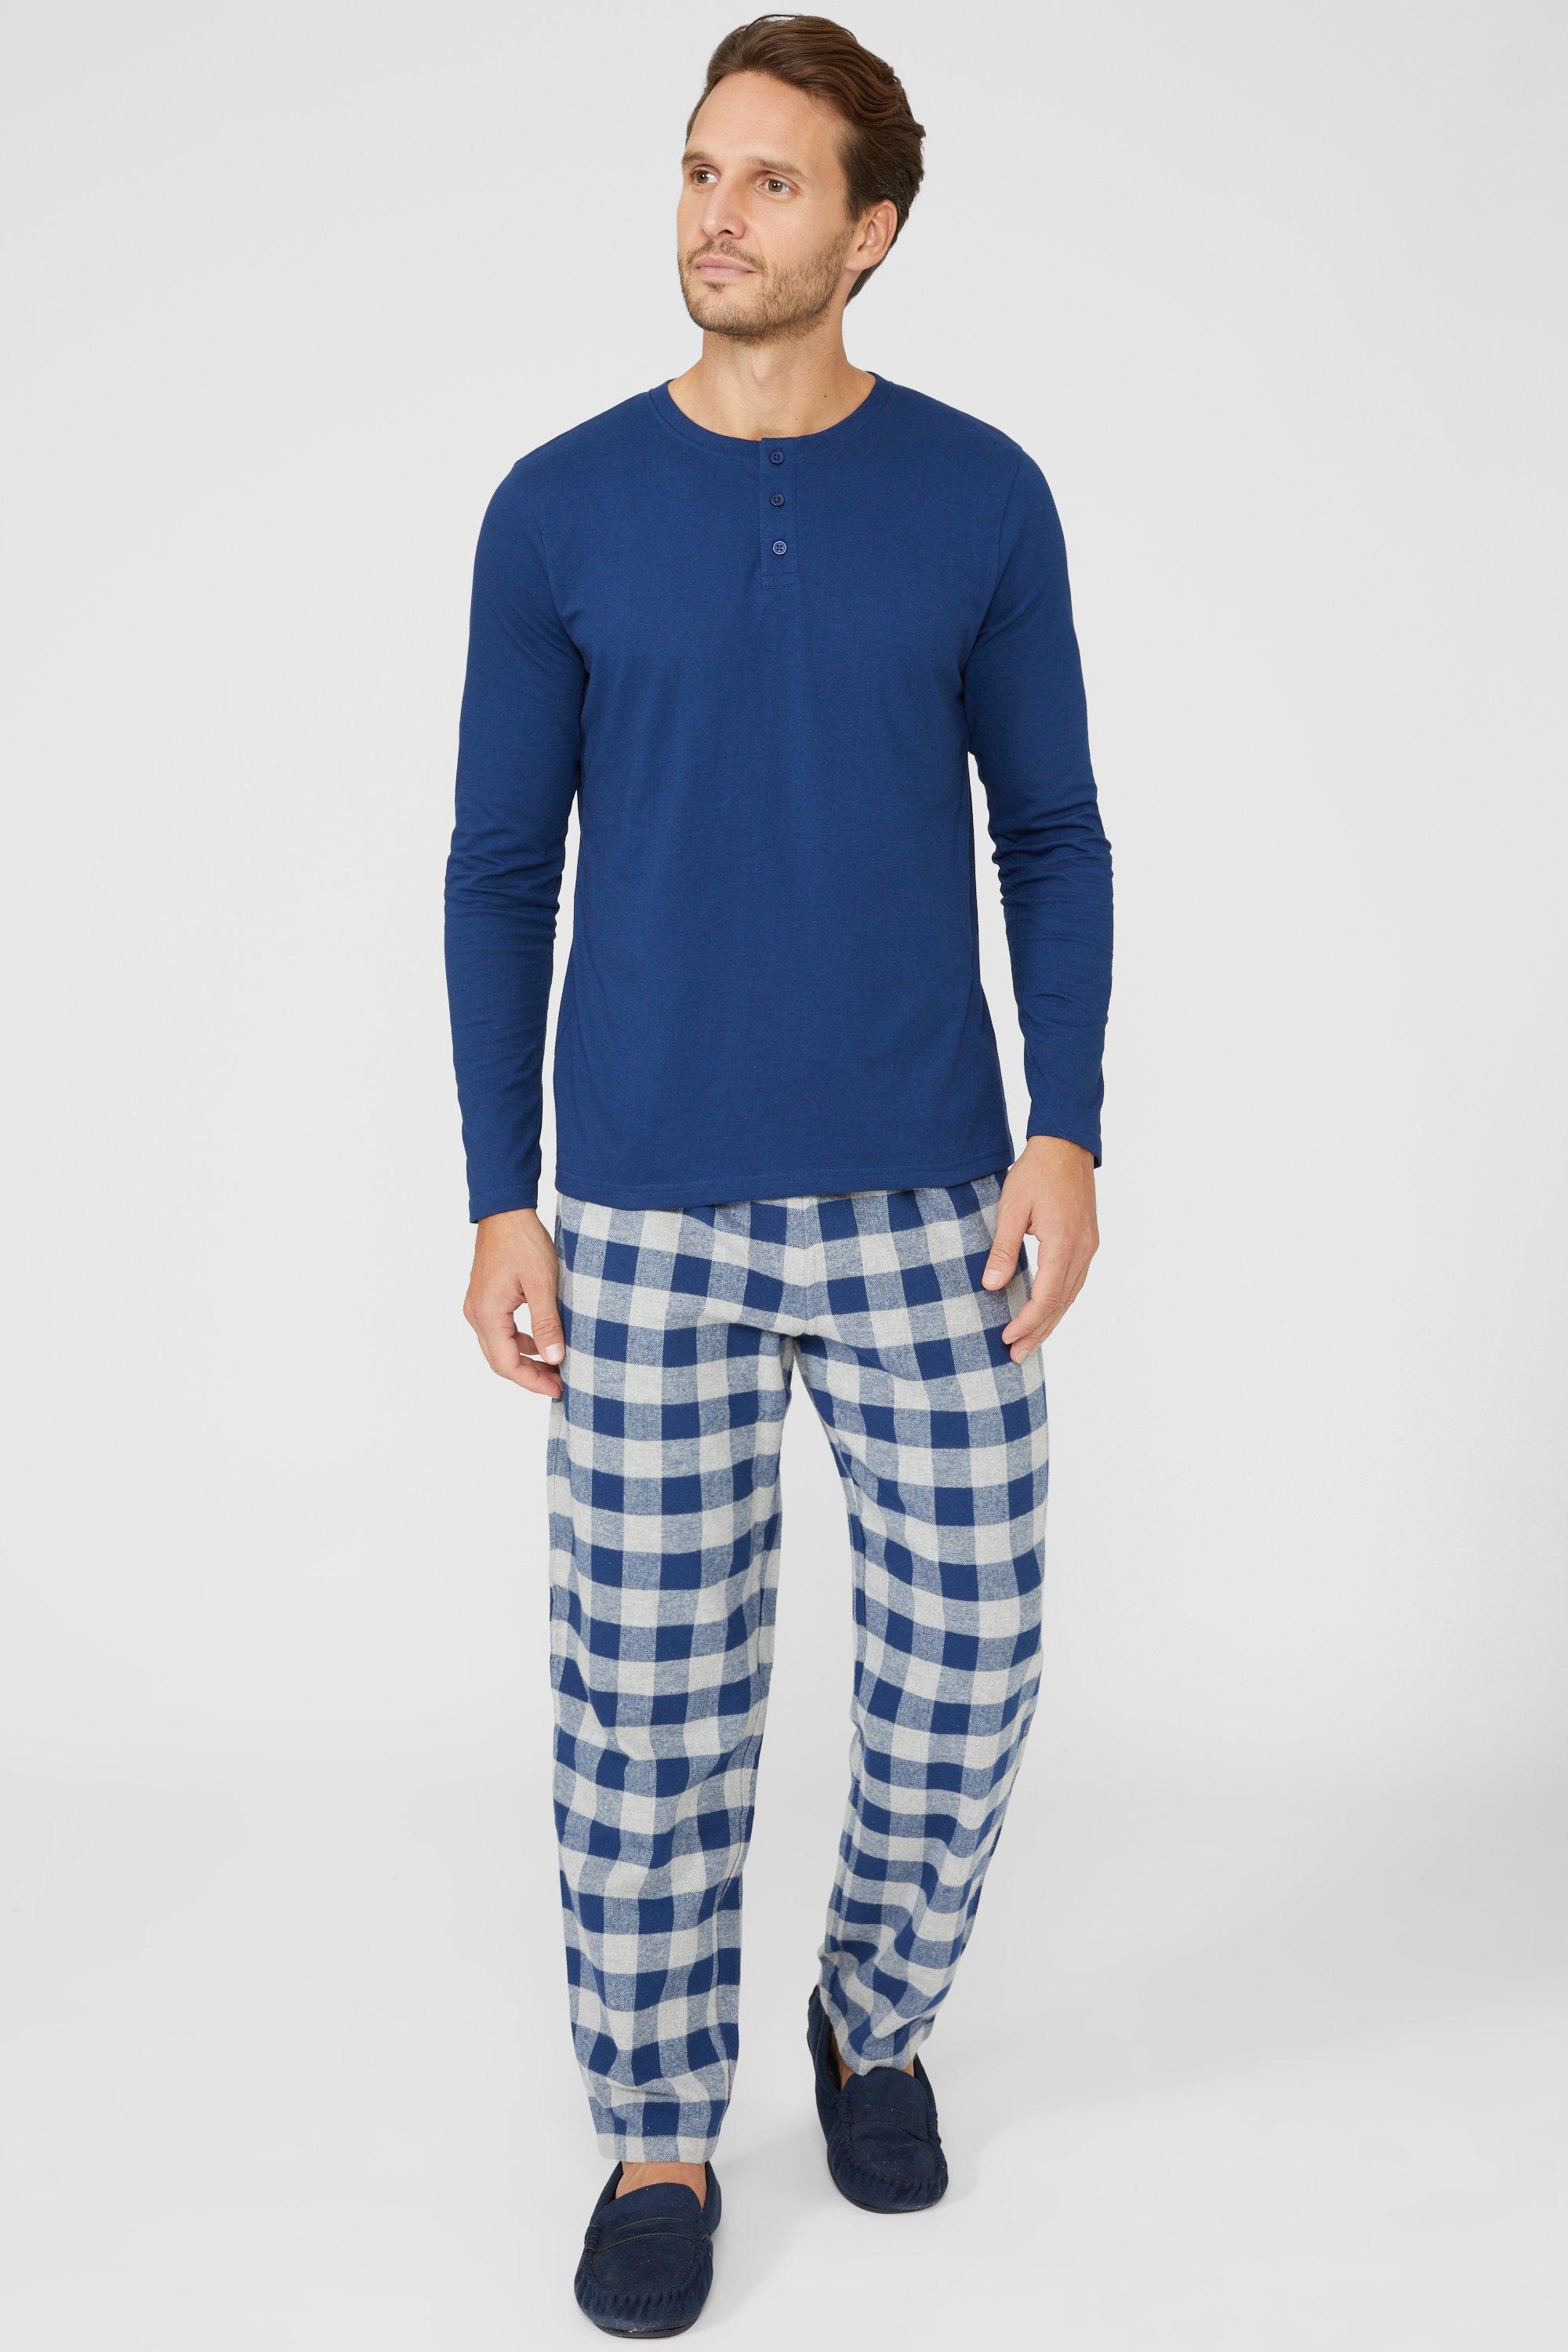 (Me) Long Sleeve Tee And Brushed Check Pant